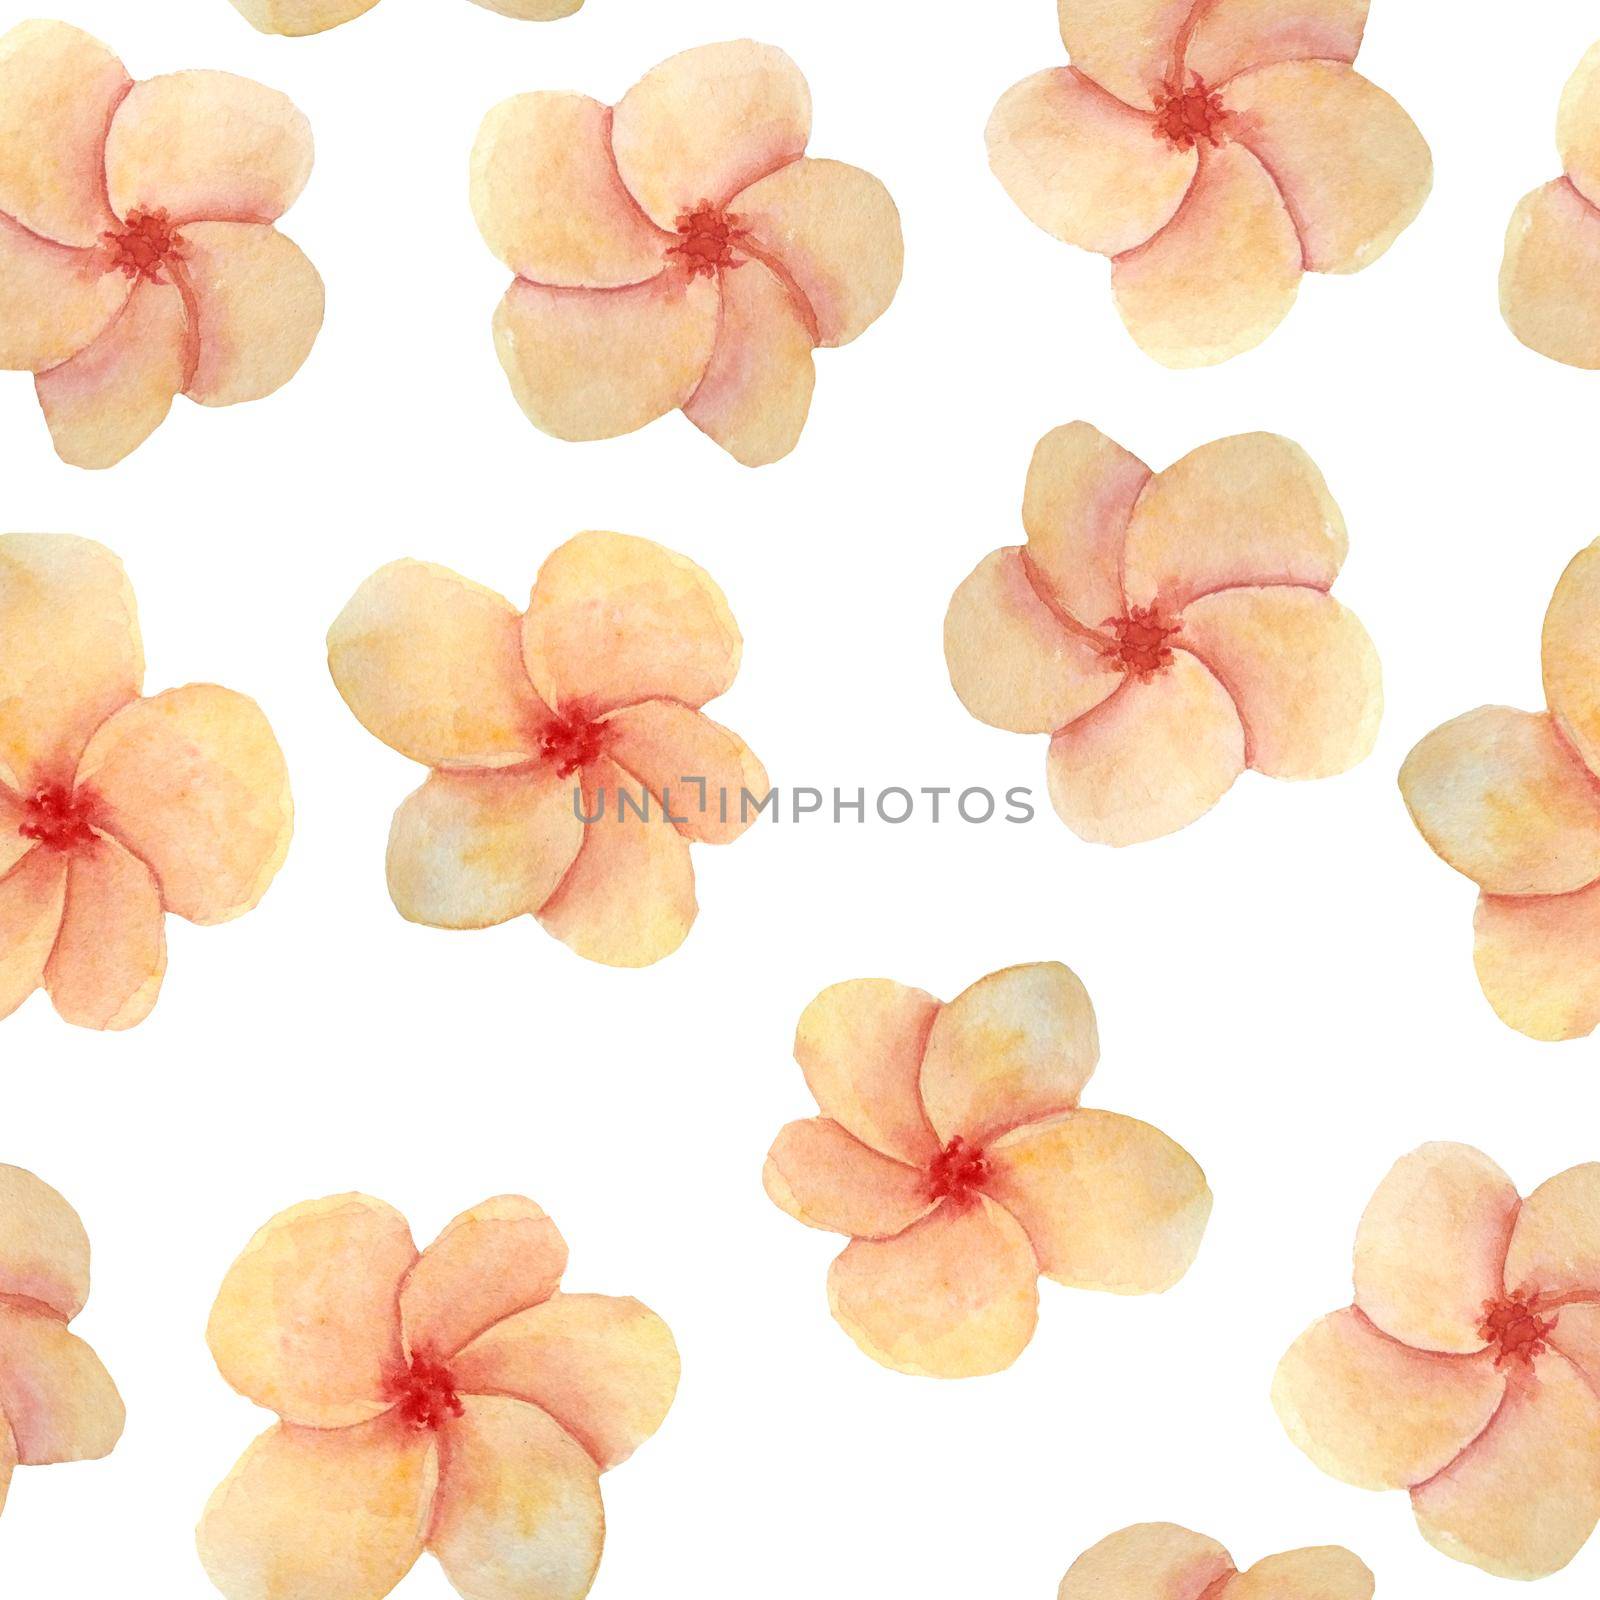 watercolor hand drawn seamless pattern elegant trendy exotic tropical plumeria frangipani. Peach orange blush flowers. Summer vacation holiday in hawaii thailand floral botanical illustration for spa textile wrapping paper